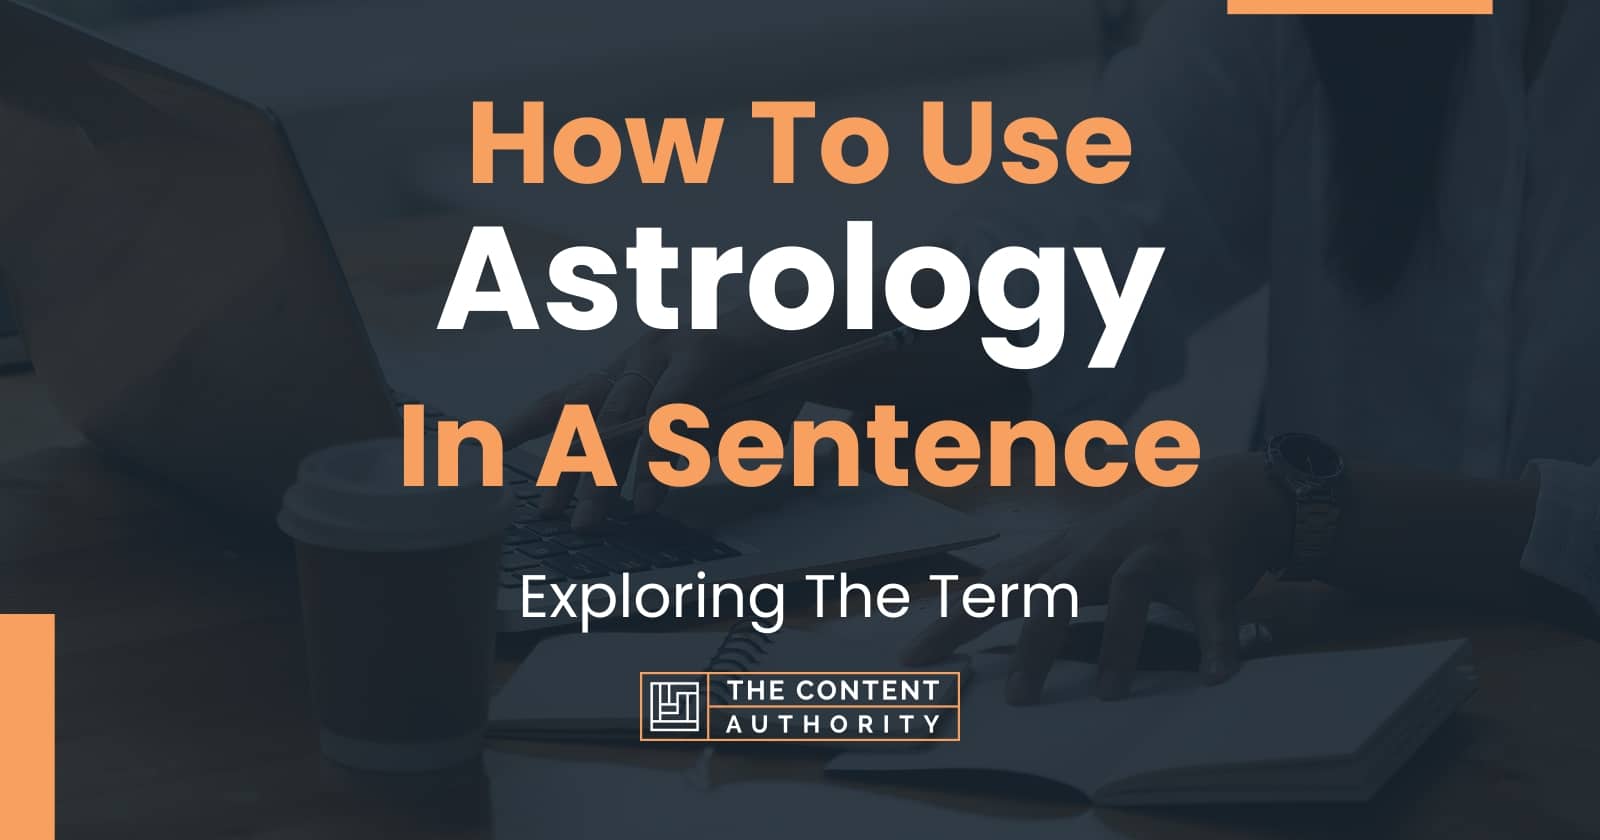 how to use astrology in a sentence examples